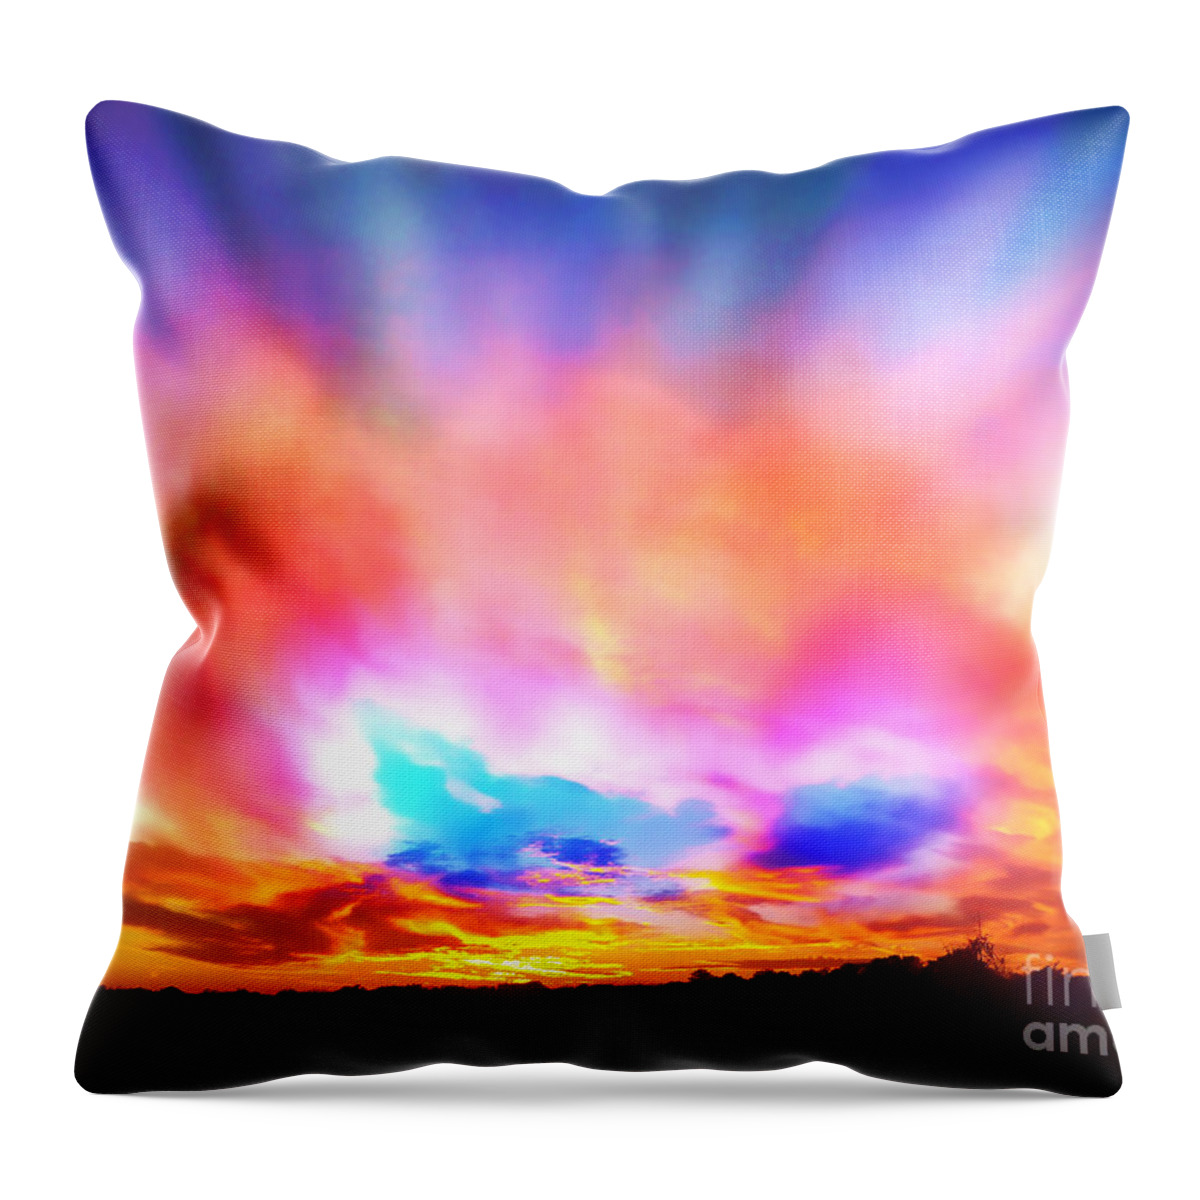 Beautiful Sunsets Throw Pillow featuring the photograph Glory Sunset by Pat Davidson